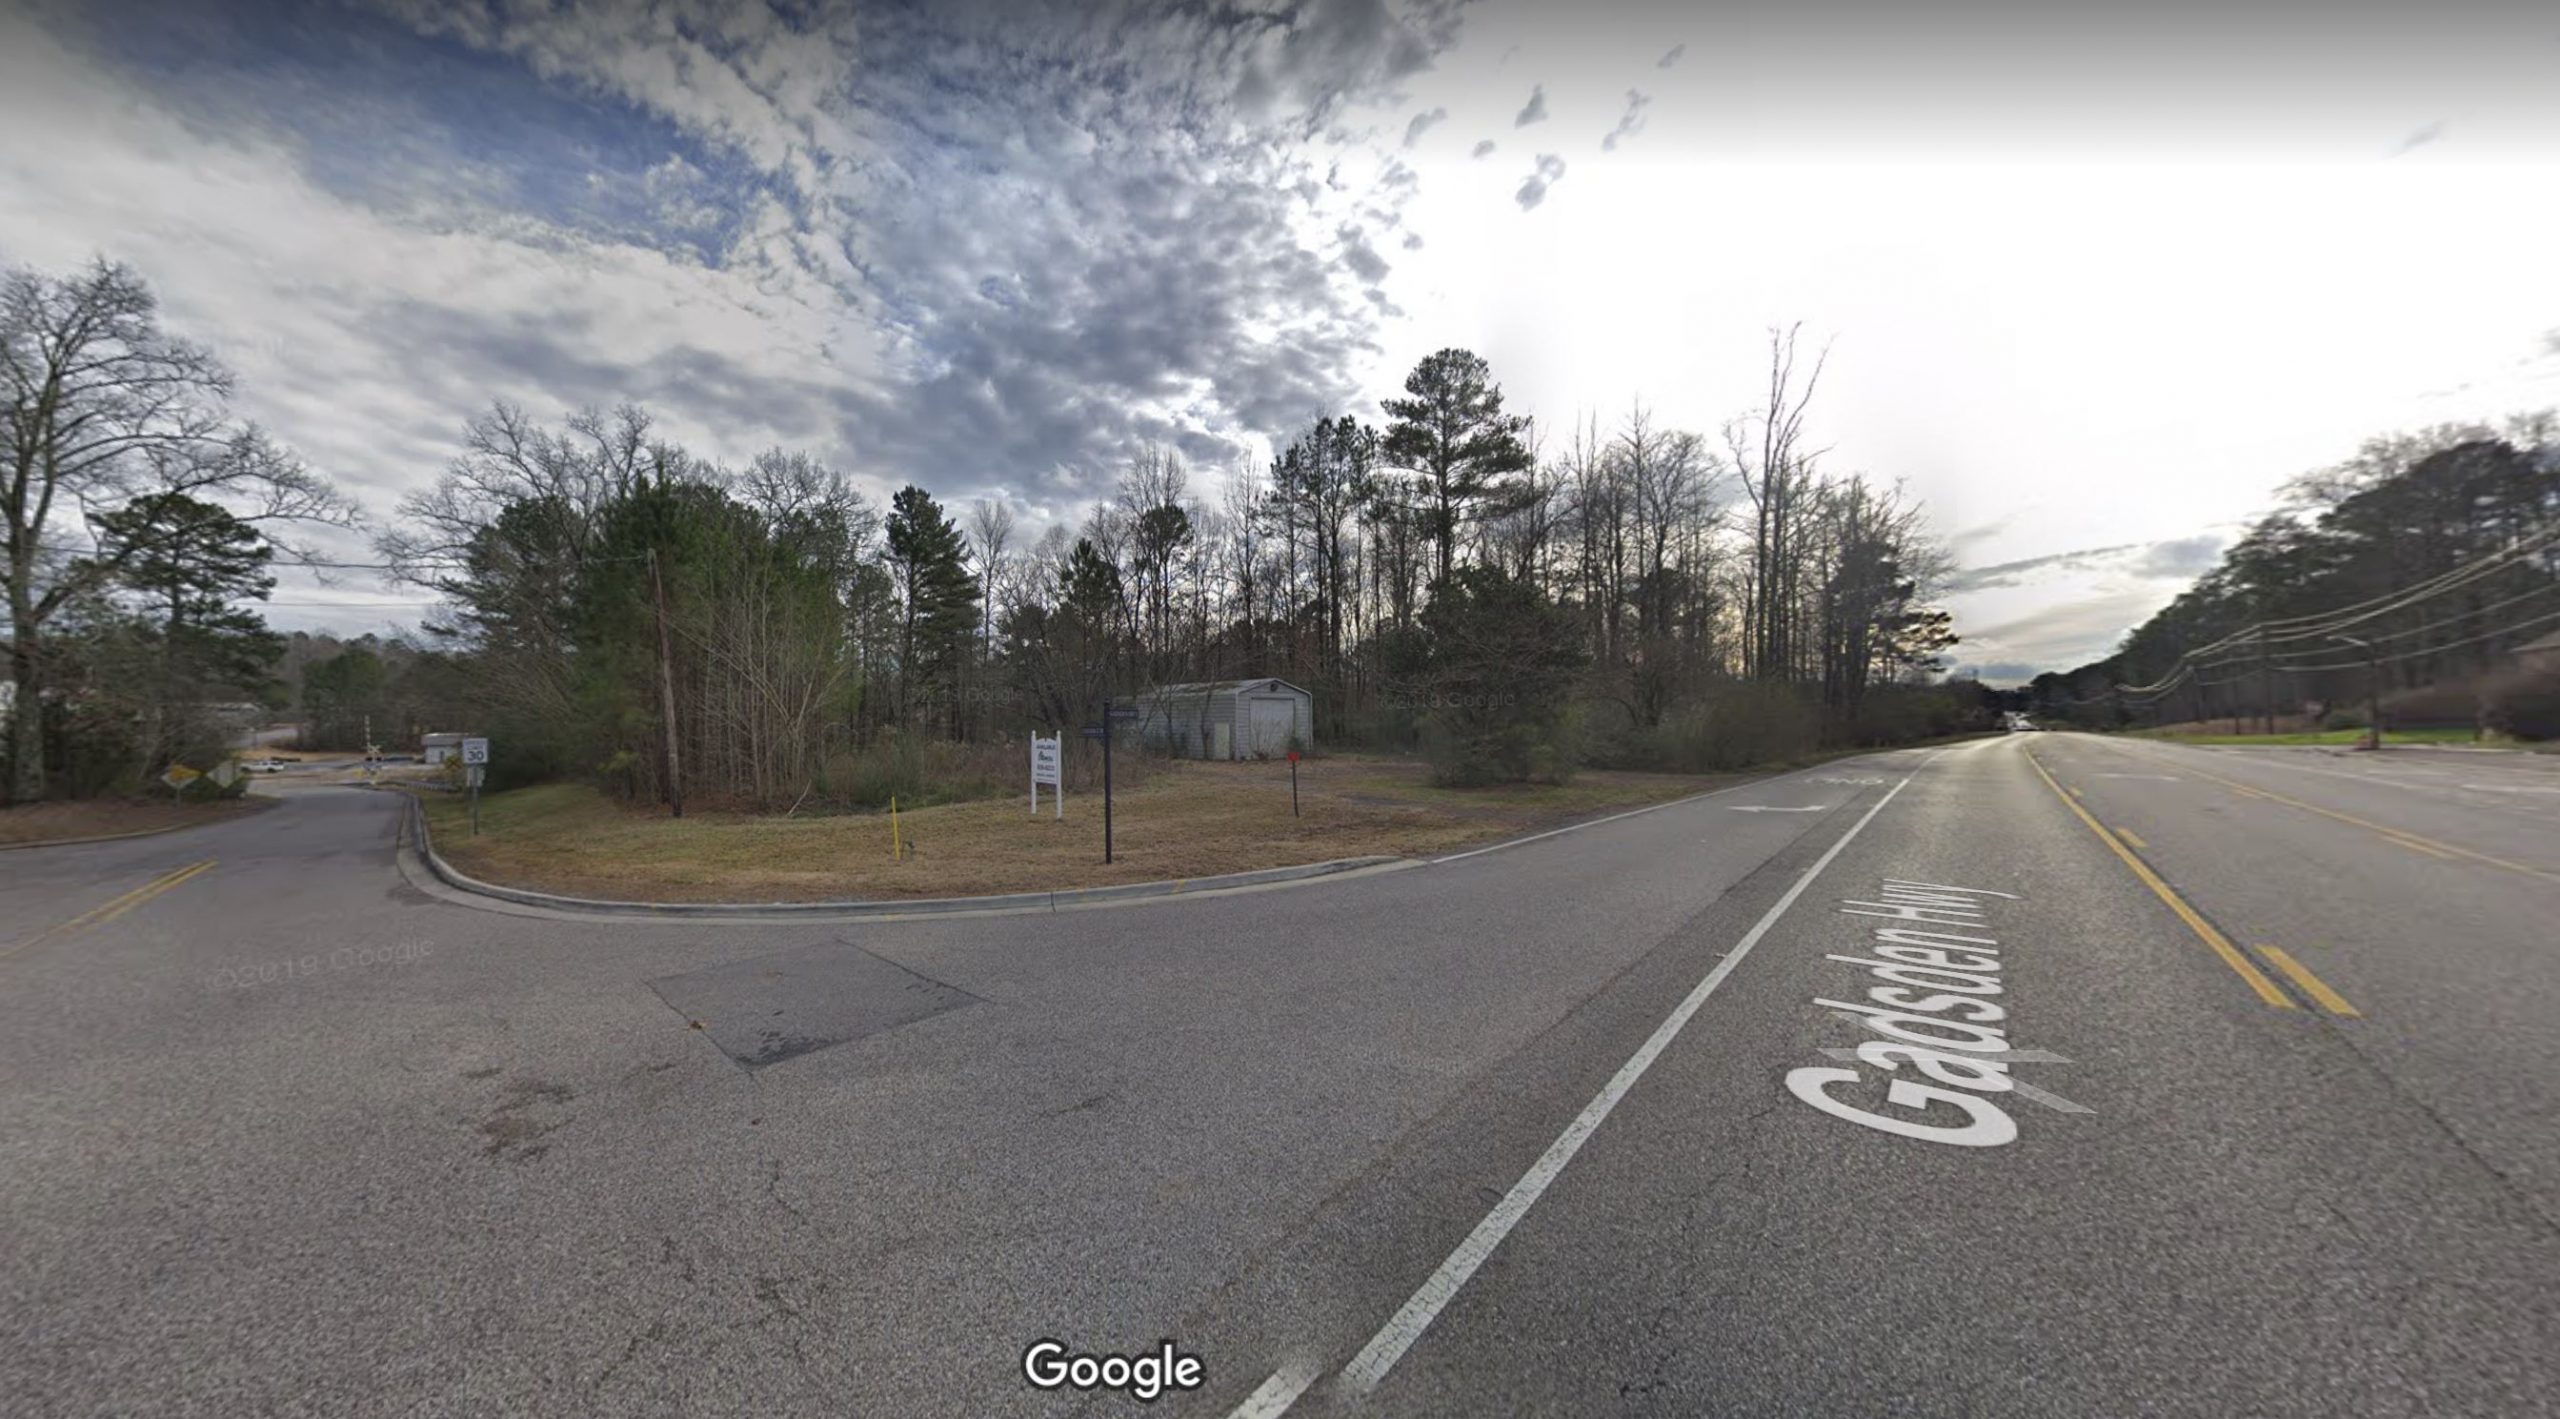 Plans proposed for new gas station on Hwy 11 in Trussville